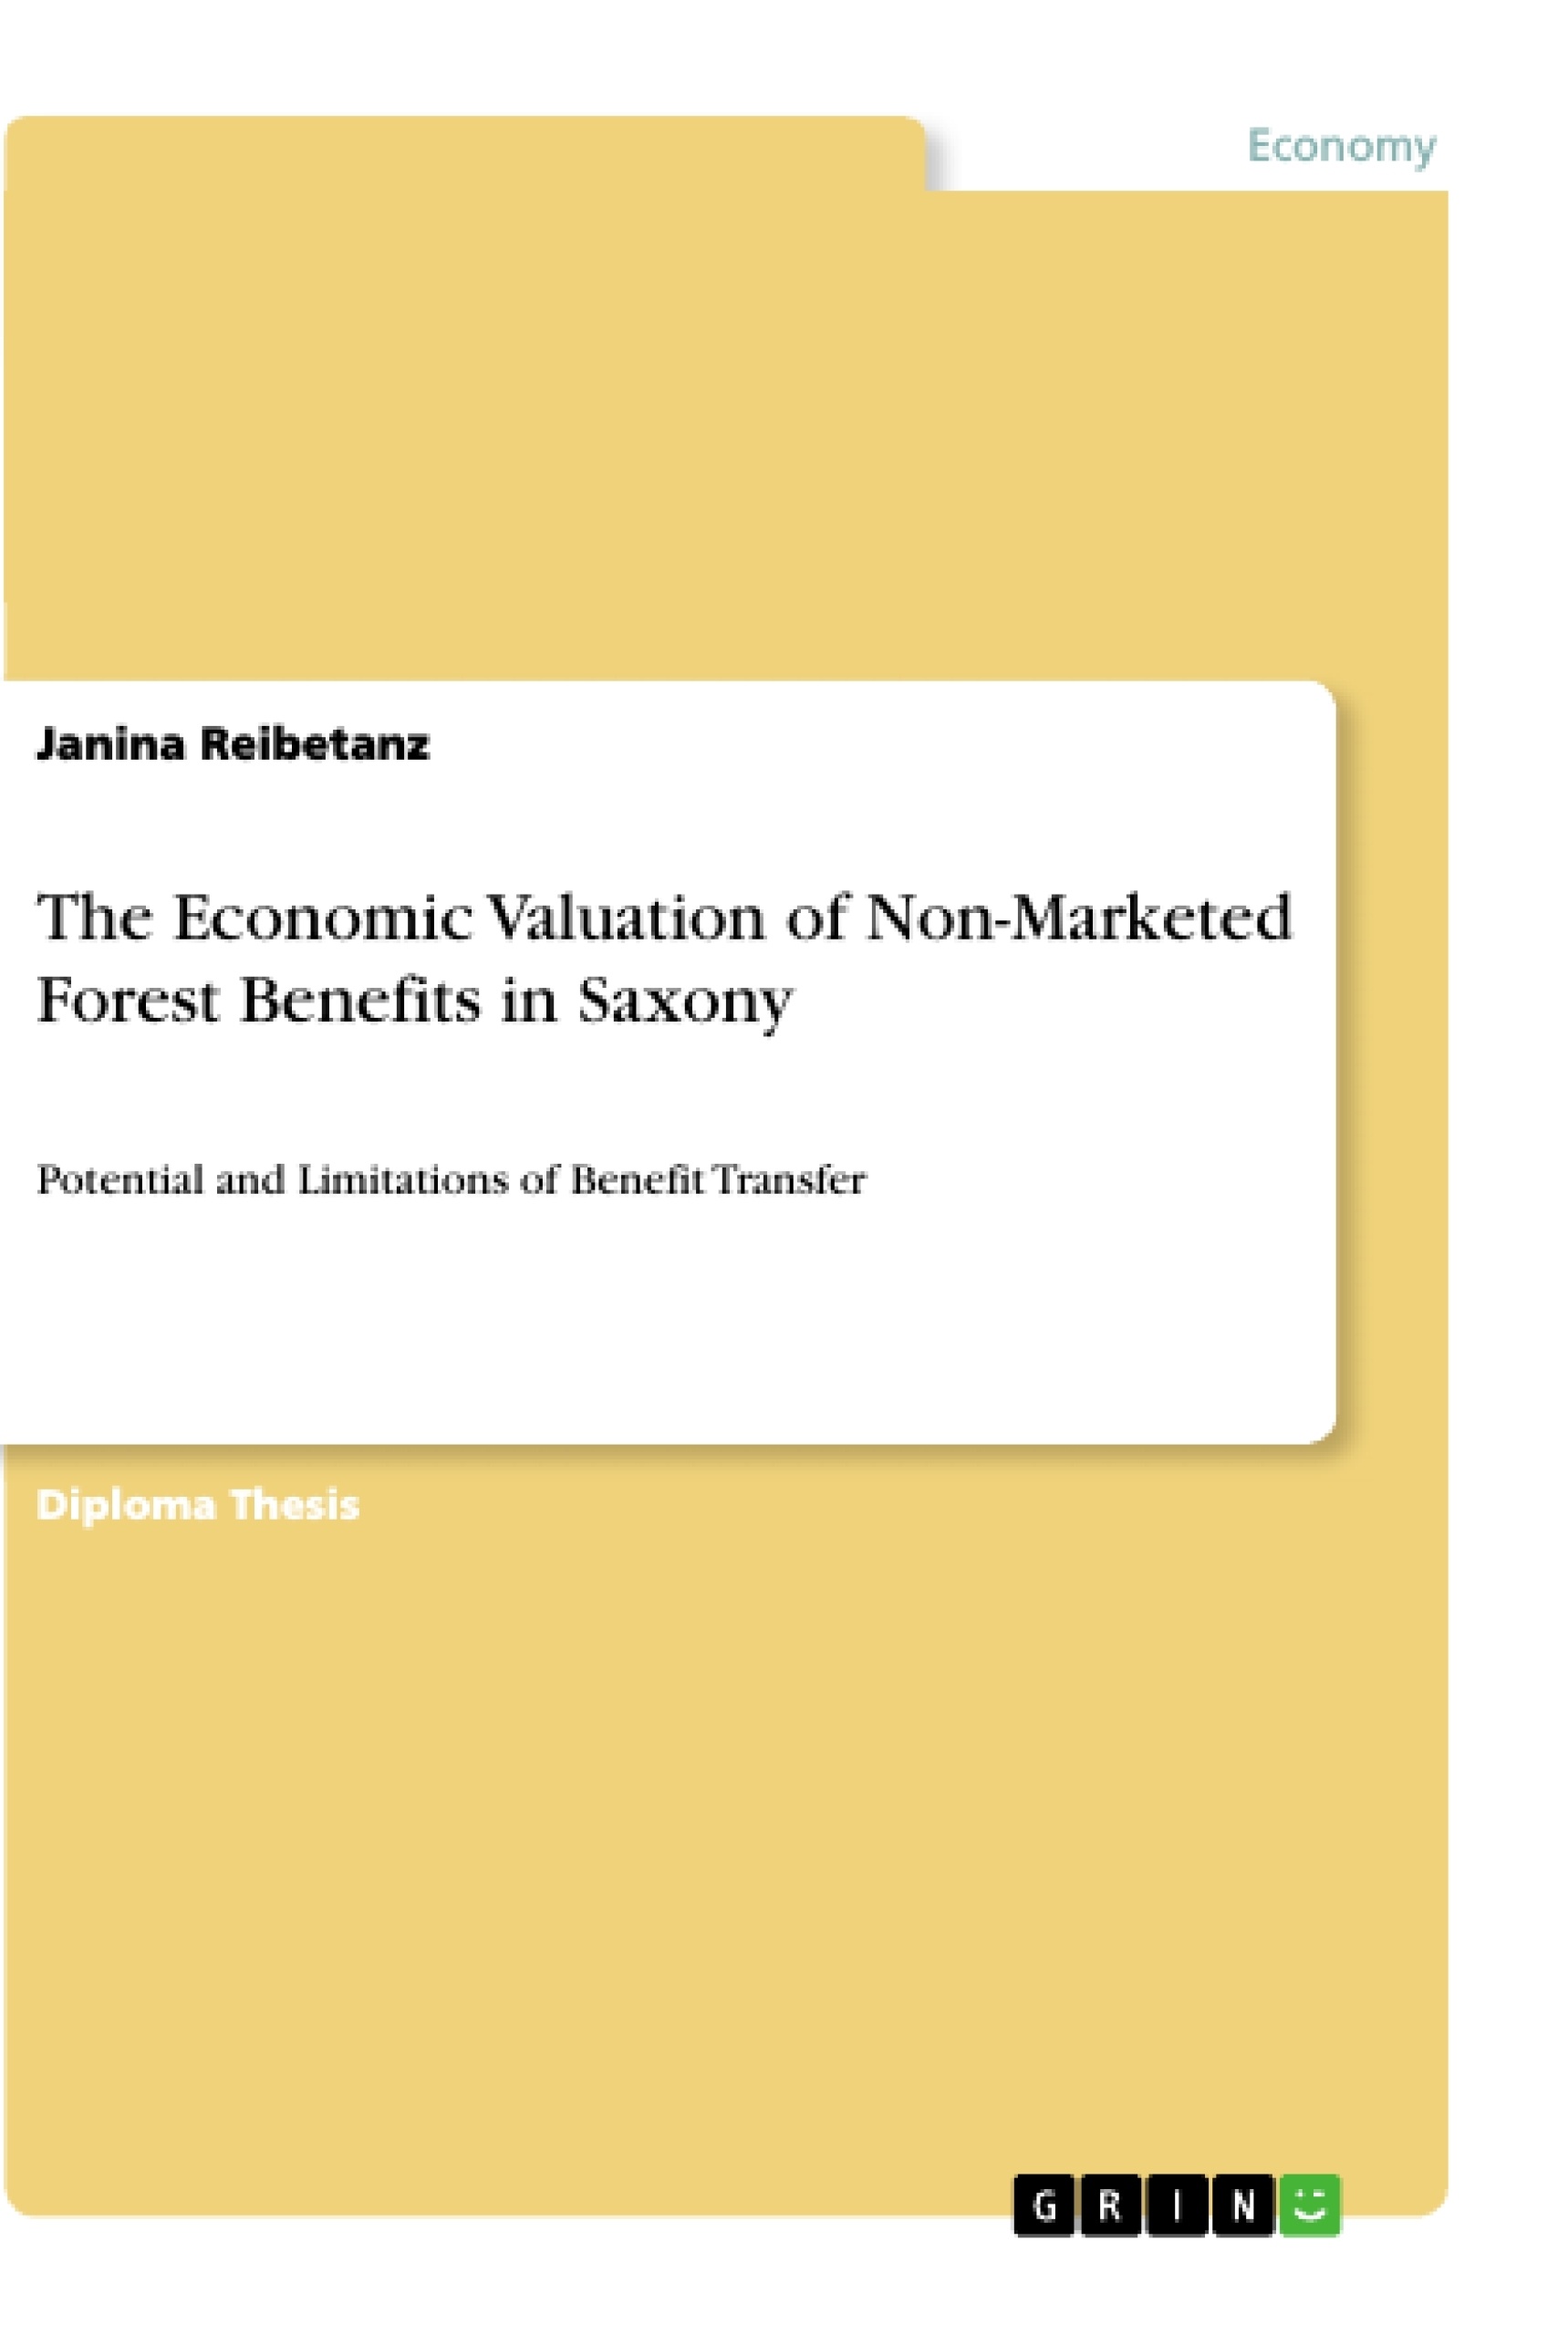 Title: The Economic Valuation of Non-Marketed Forest Benefits in Saxony